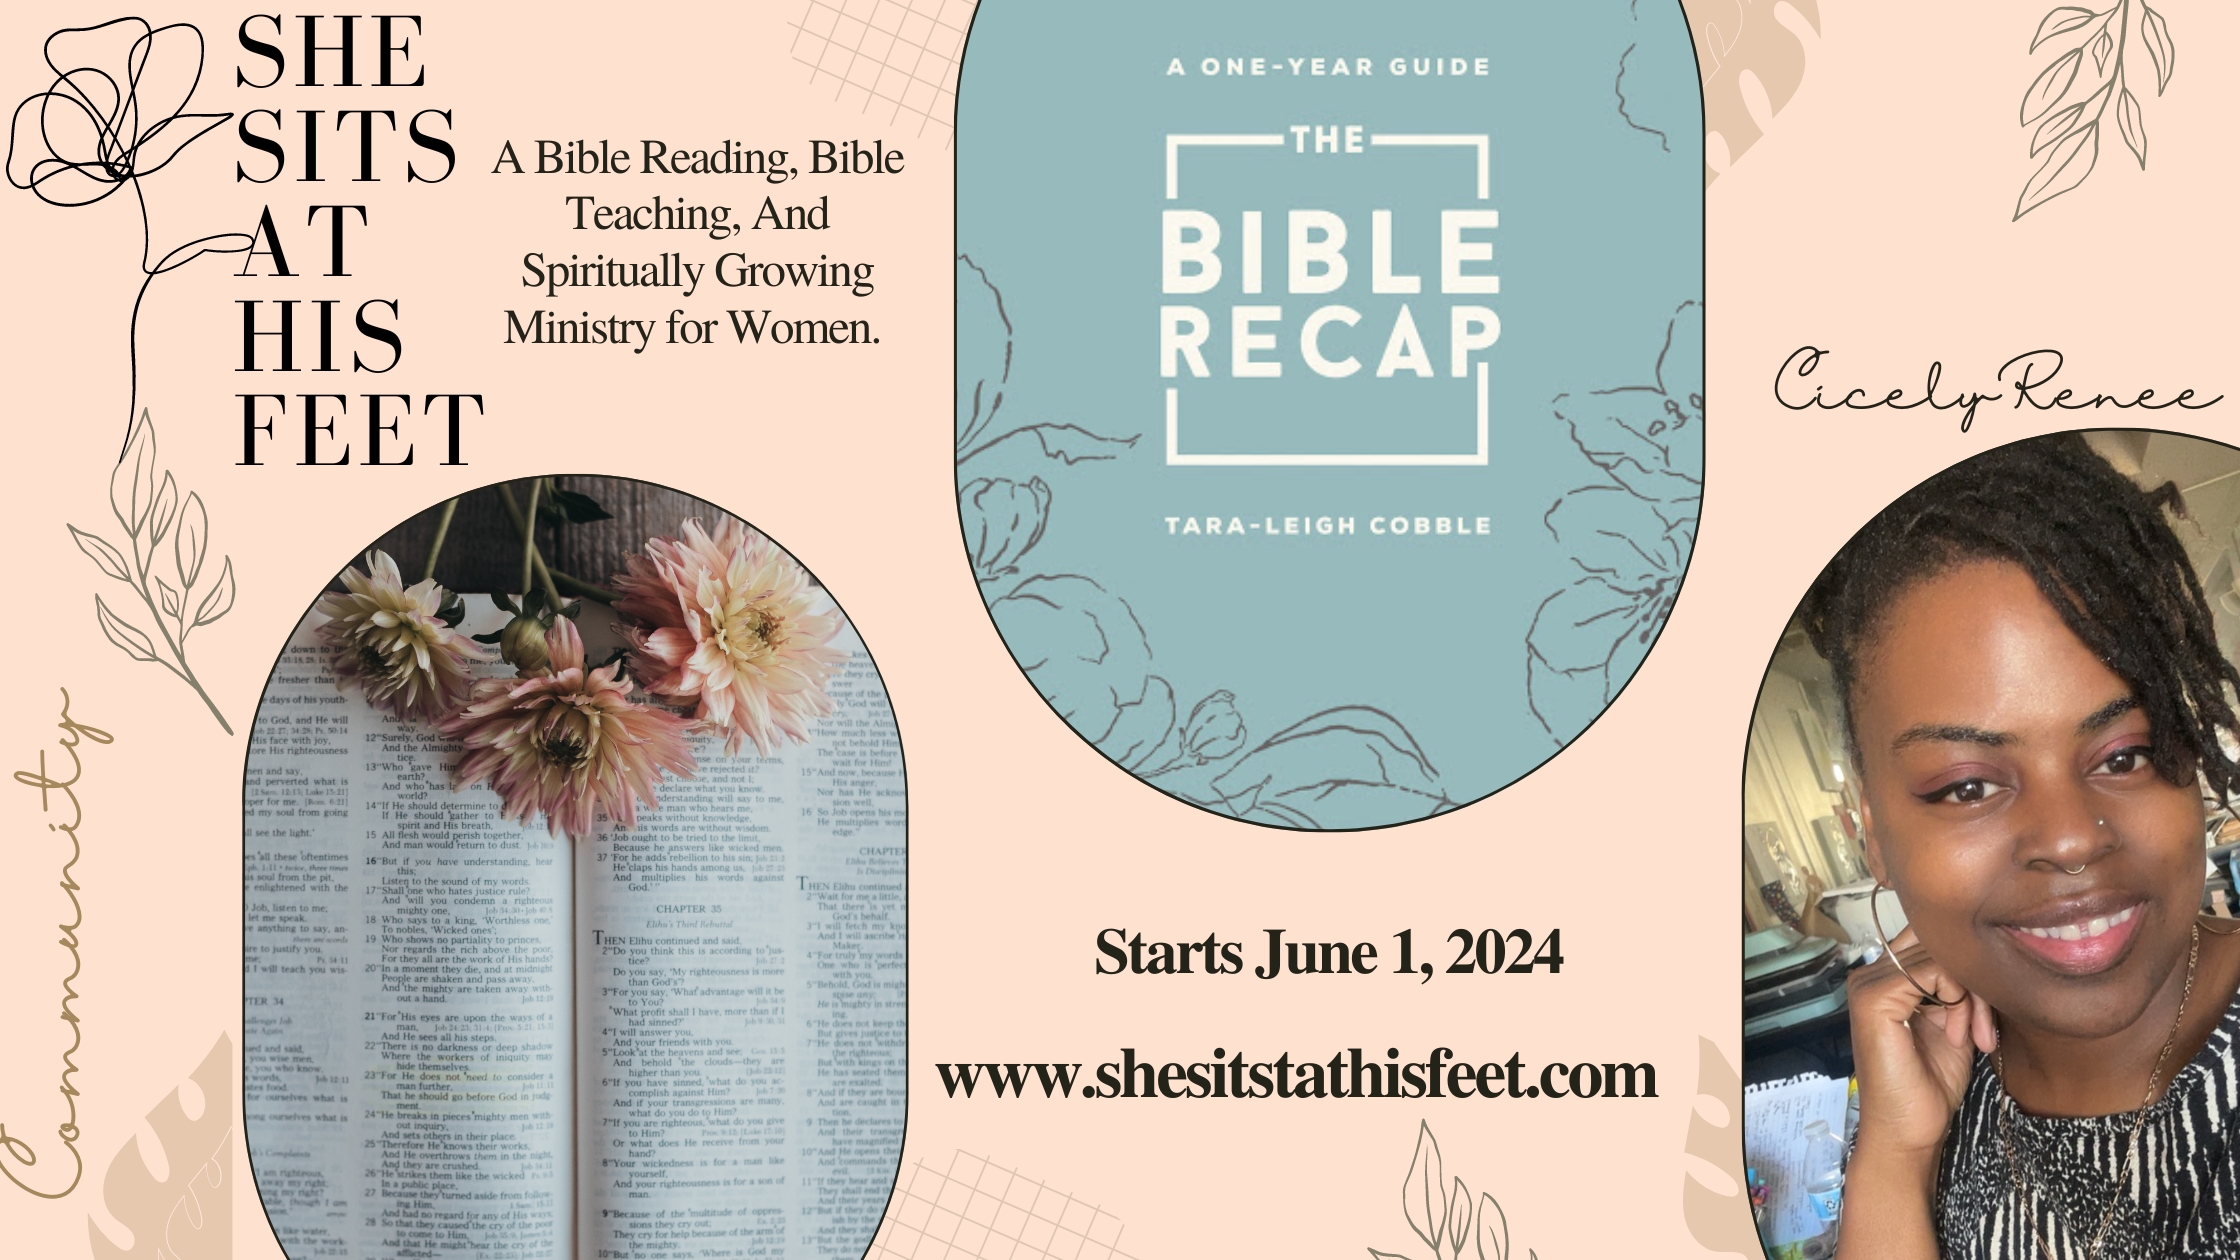 Read the Bible In A Year Challenge Starts June 1, 2024